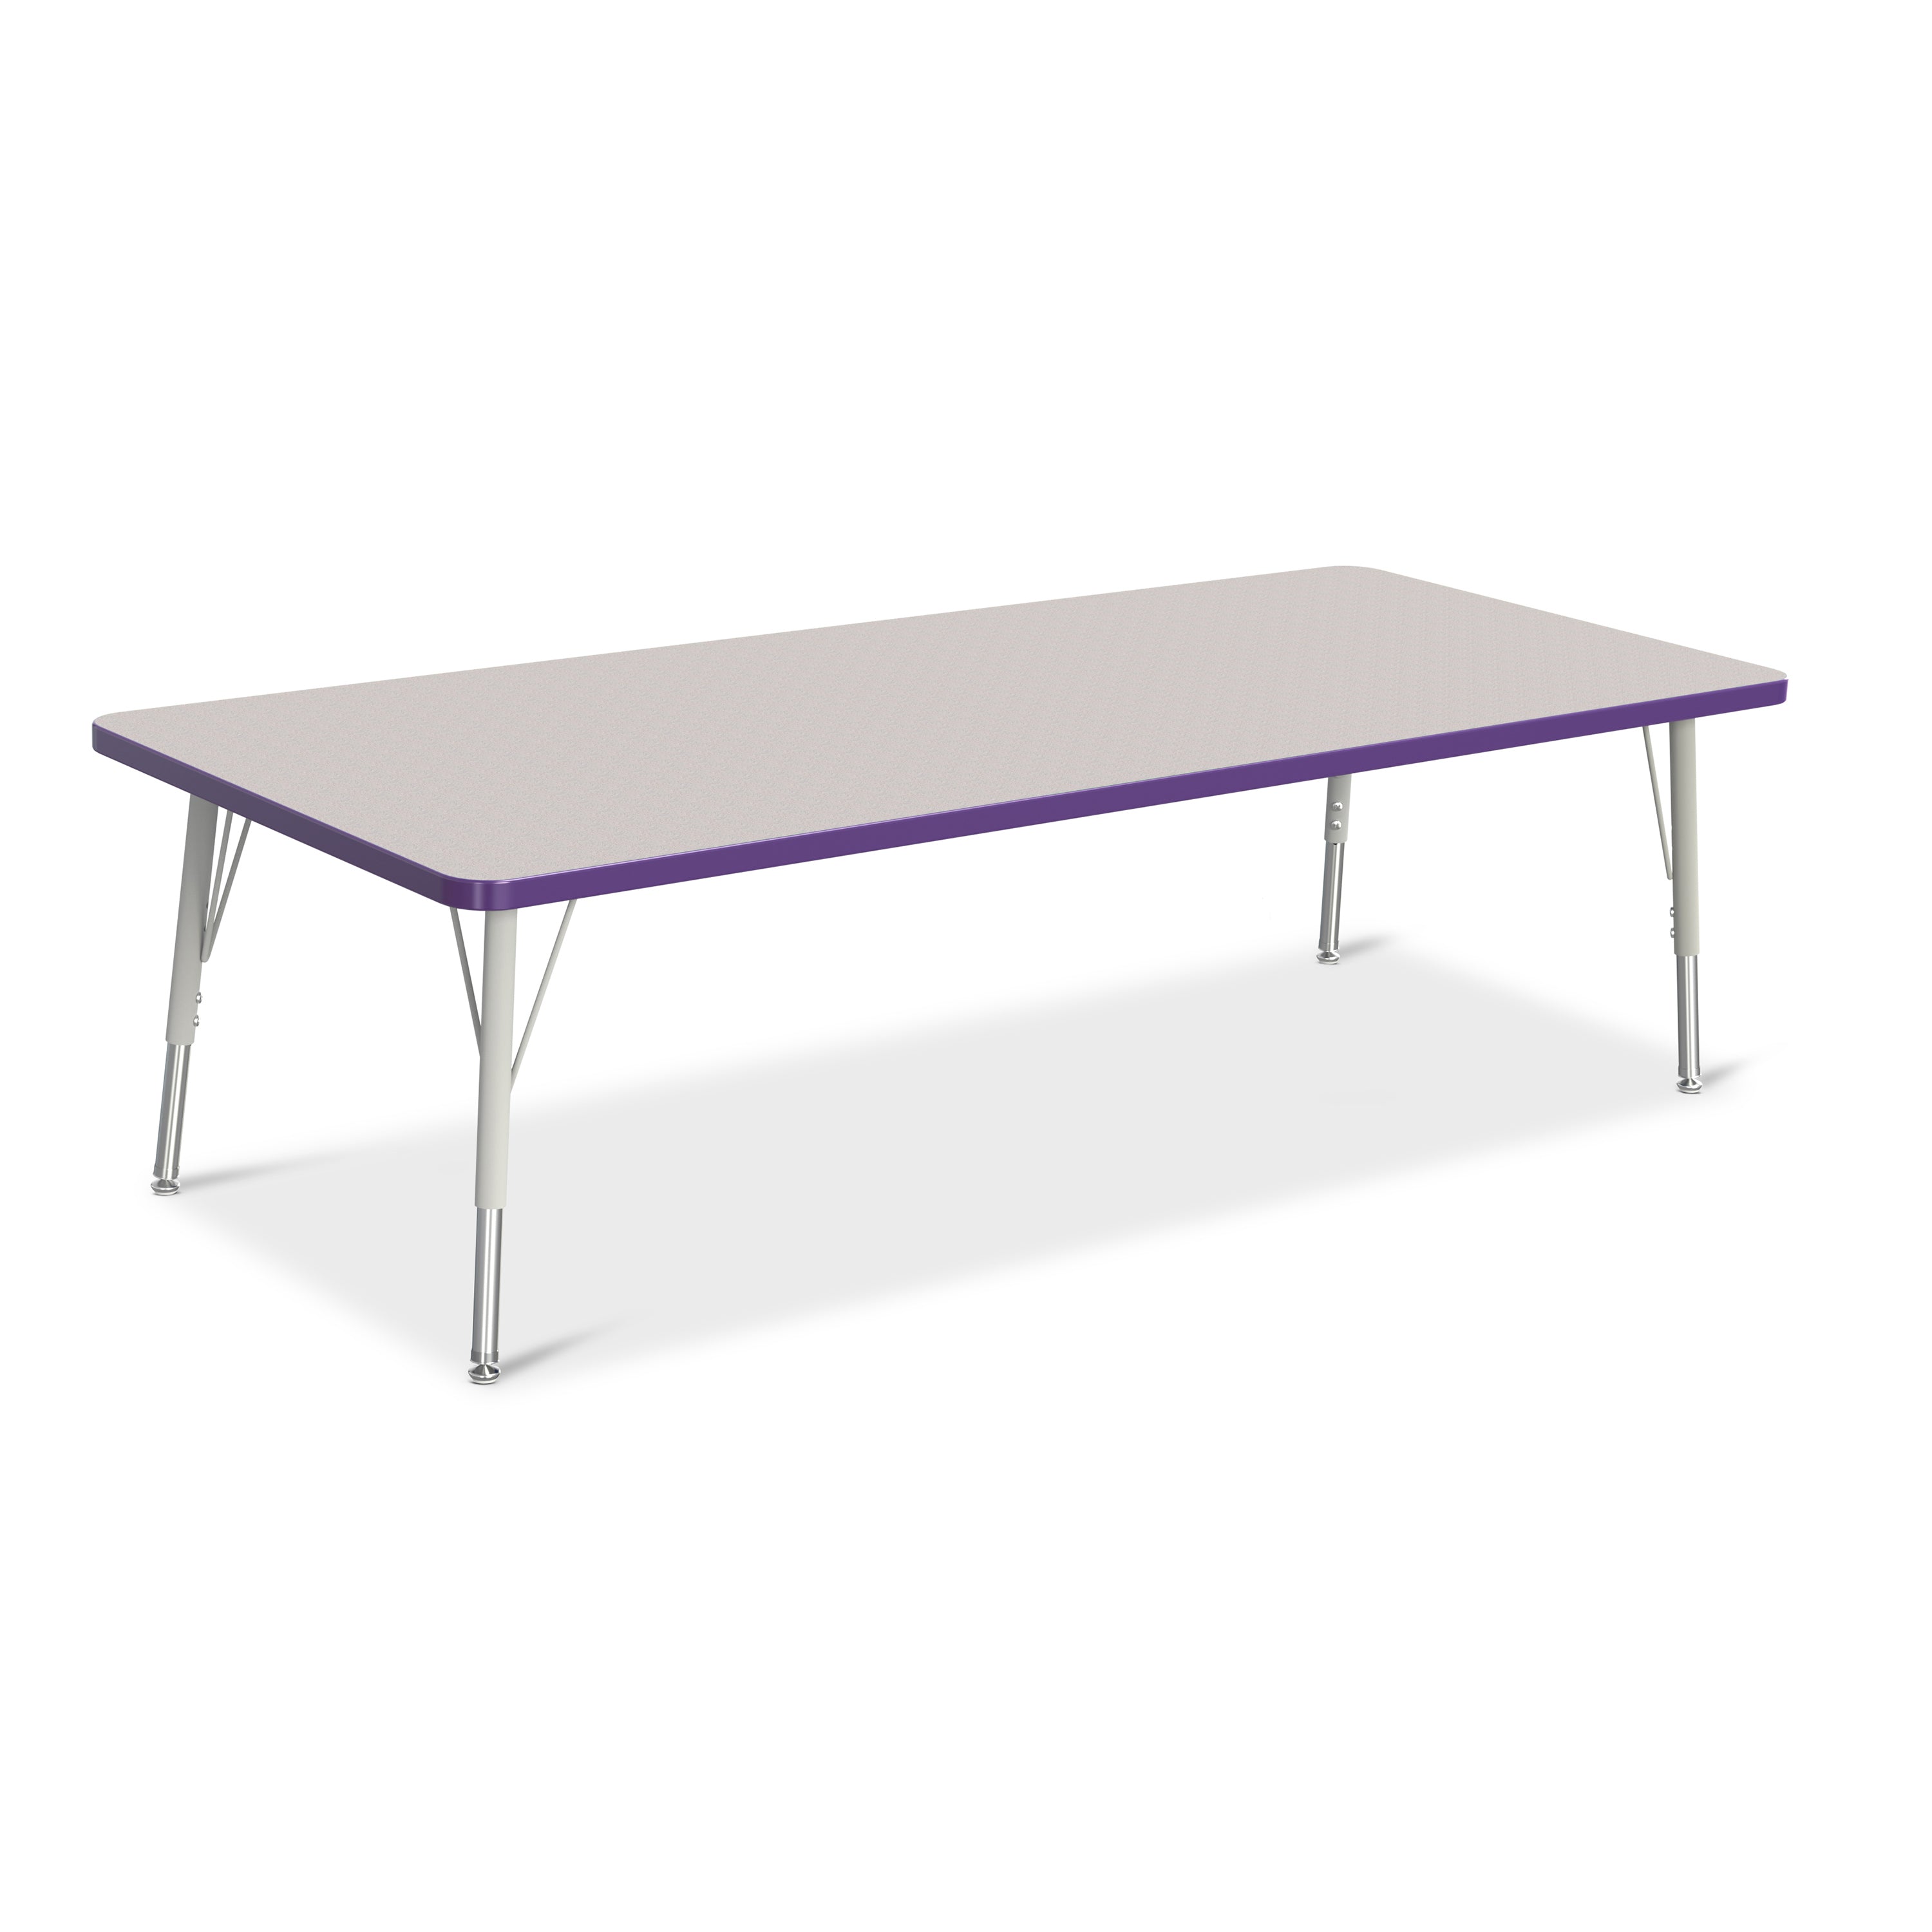 6413JCE004, Berries Rectangle Activity Table - 30" X 72", E-height - Freckled Gray/Purple/Gray